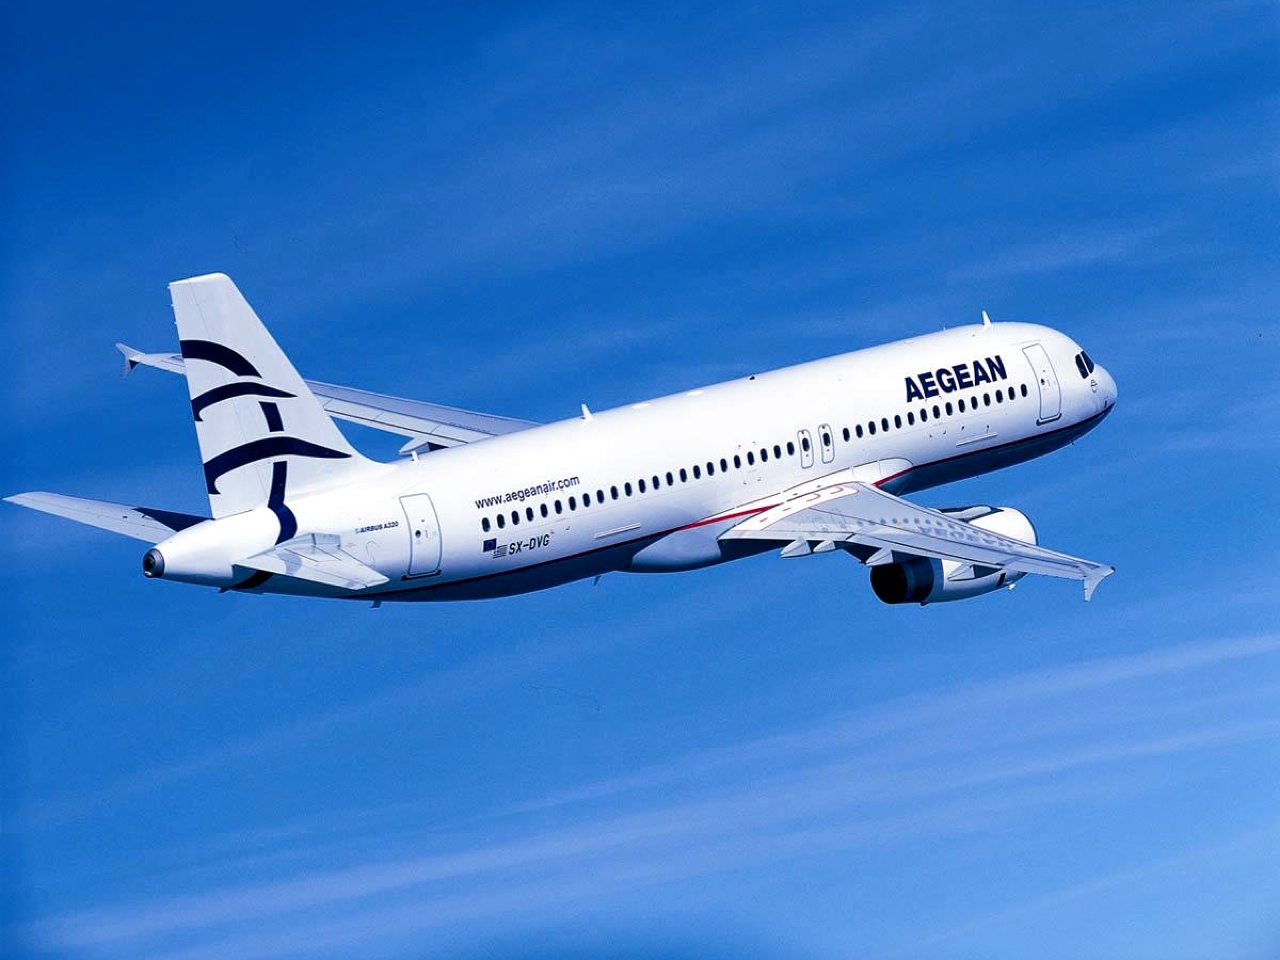 AEGEAN Wins, Once Again, Best Regional Airline in Europe Award from Skytrax